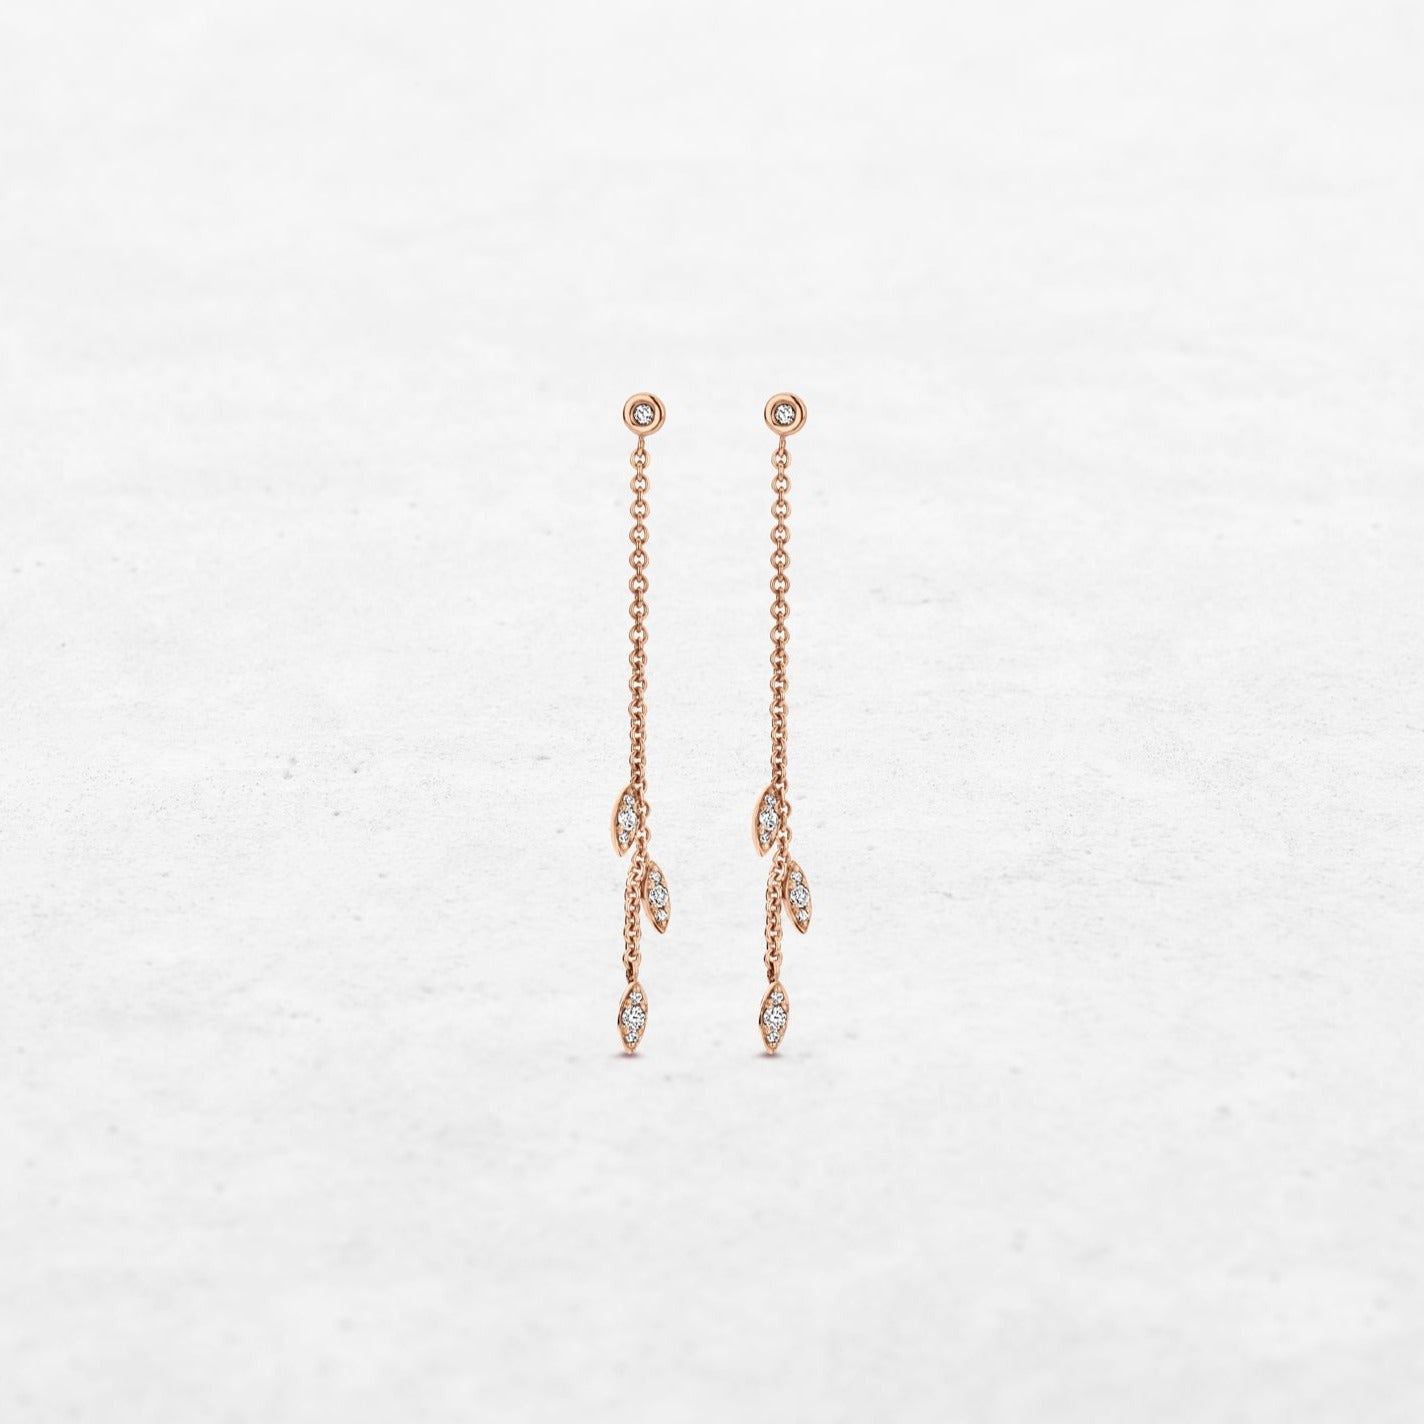 Triple diamond leaf earrings hanging on chain in rose gold made by O! Jewelry